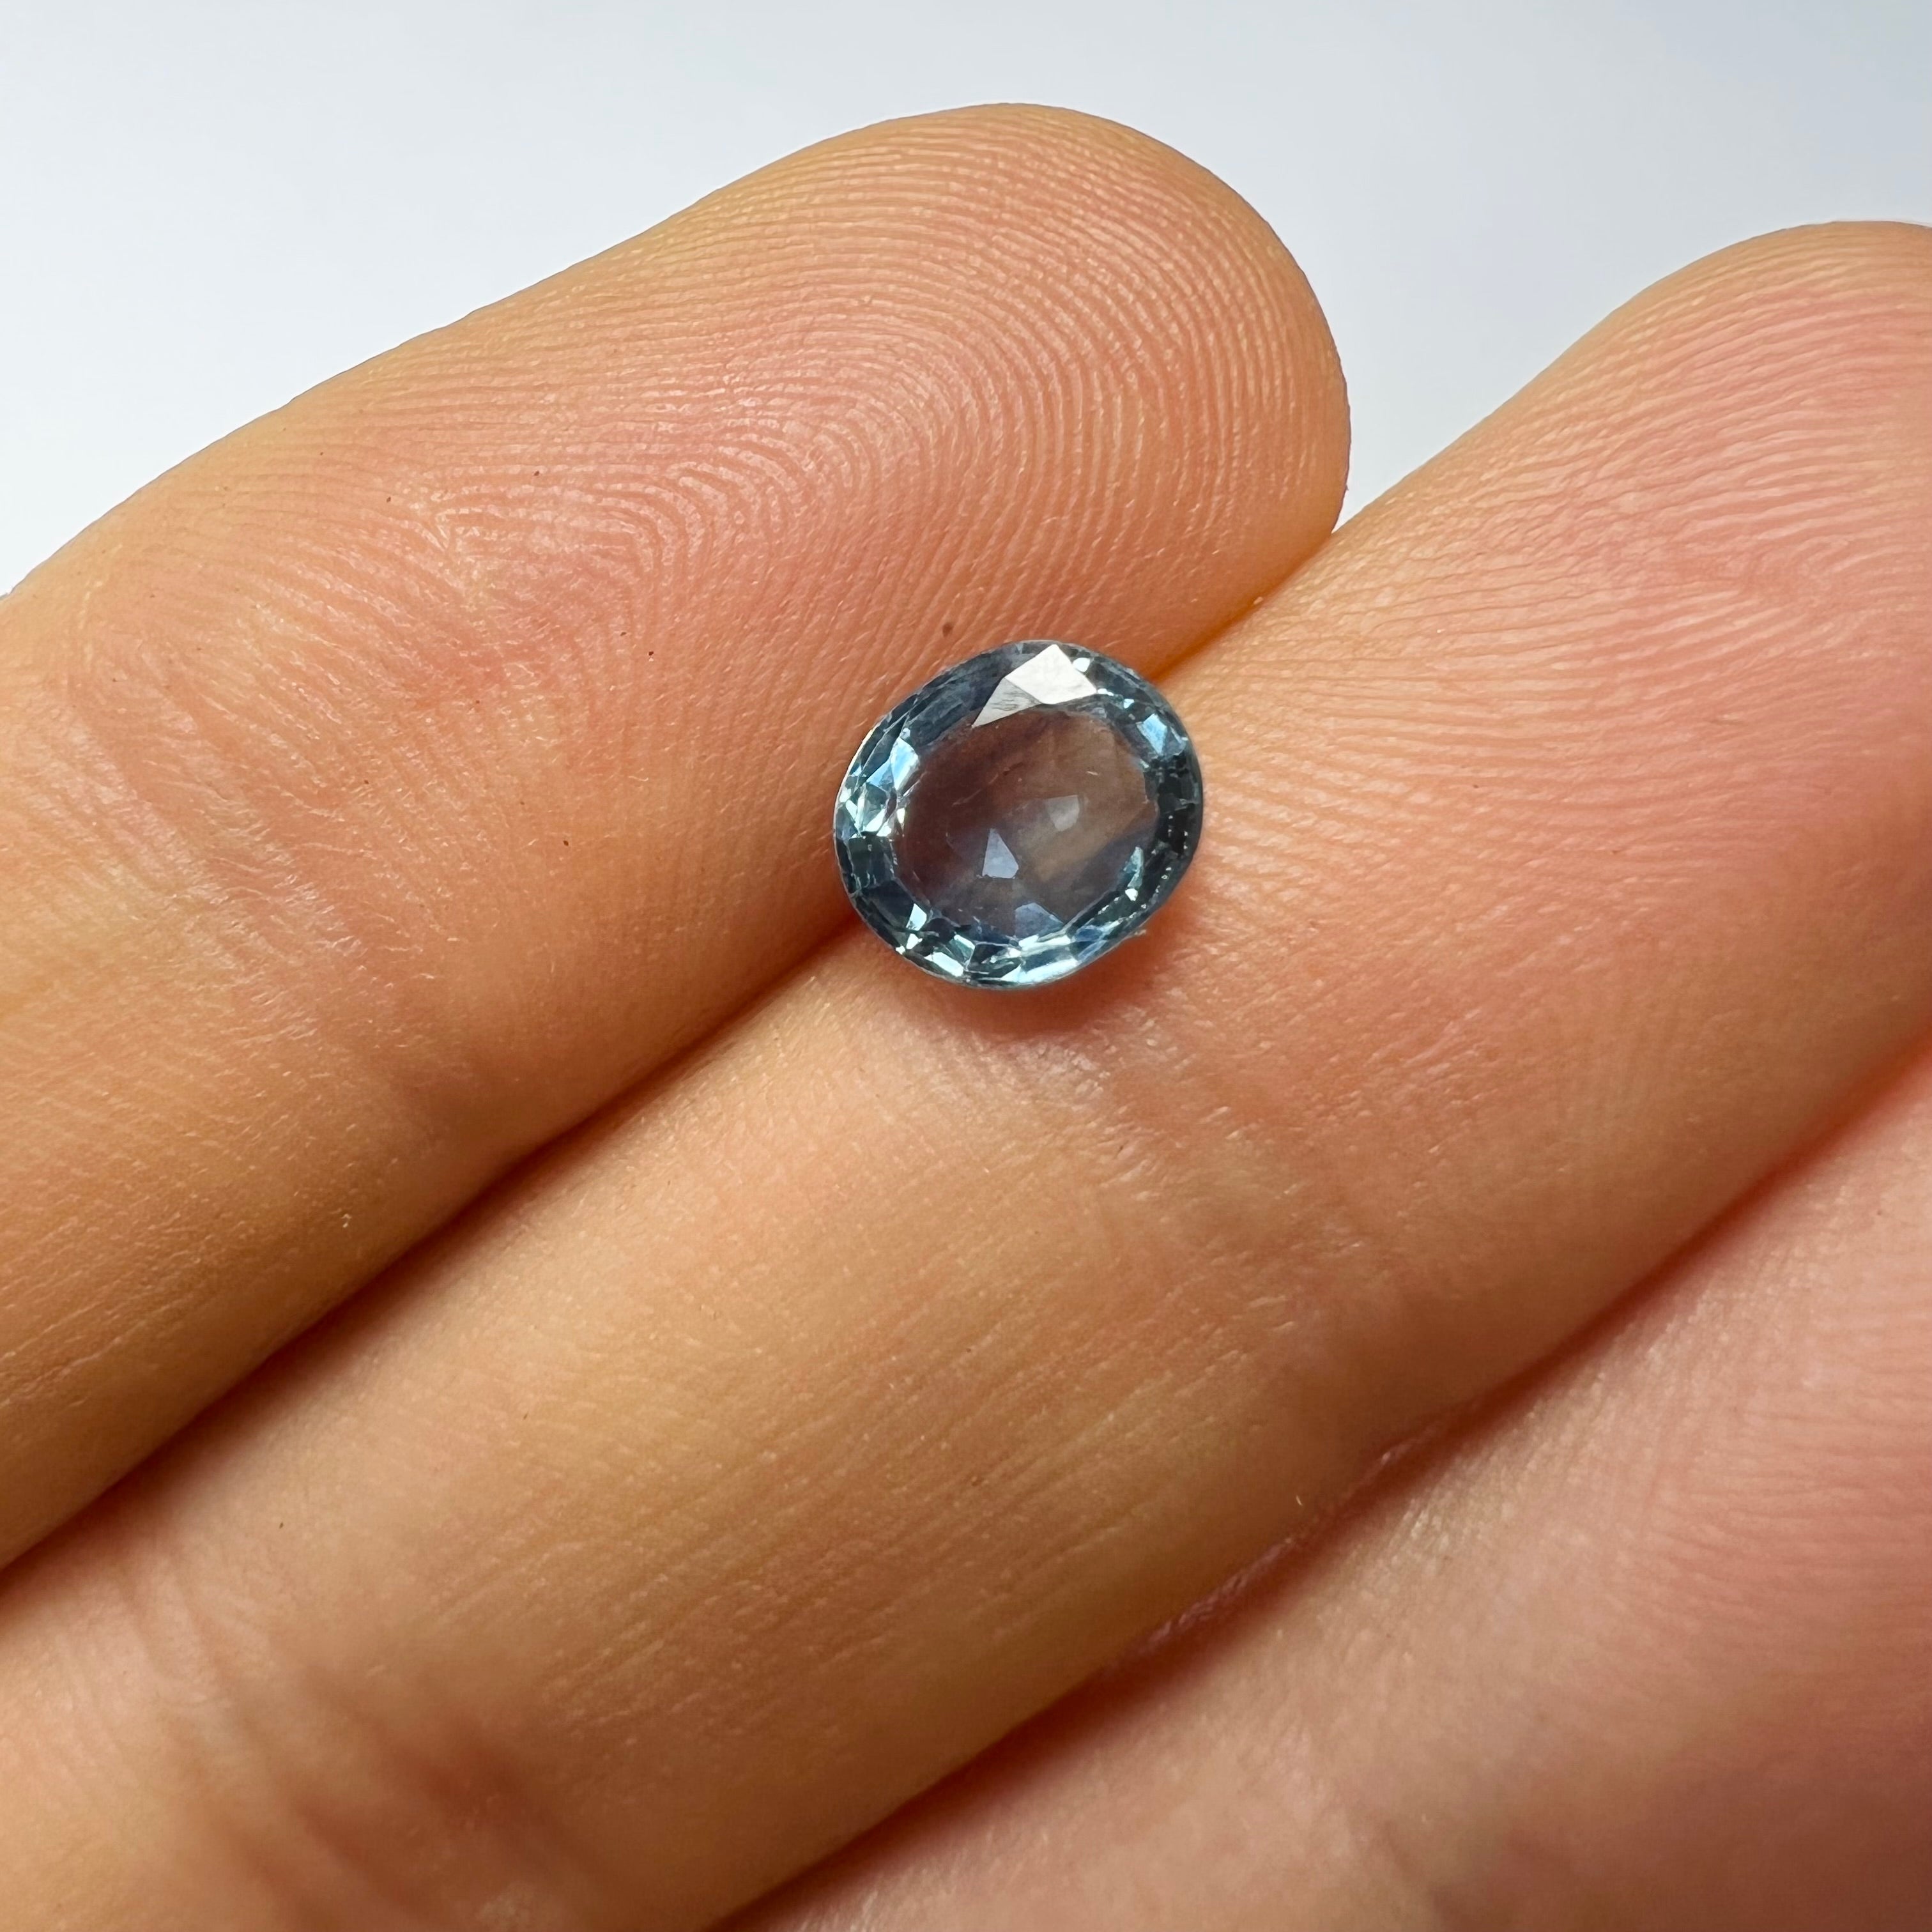 1.41CTW Loose Natural Oval Sapphire 6.86x6.04x3.12mm Earth mined Gemstone